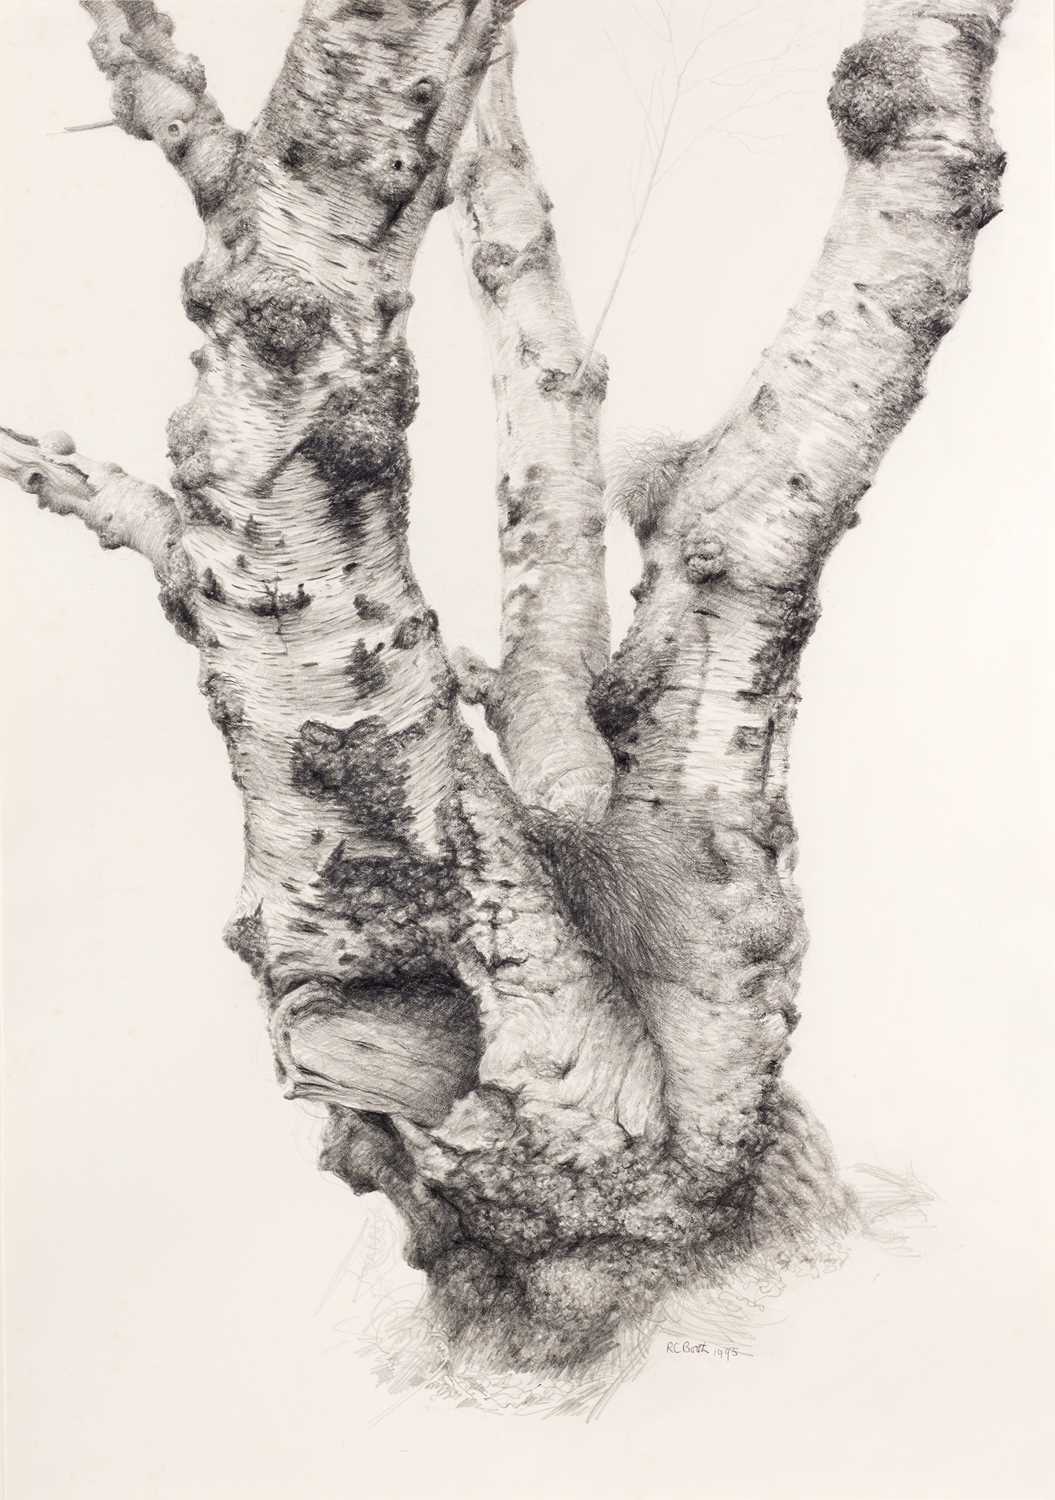 Raymond Booth (1929-2015) “Tree Study” Signed and dated 1995, pencil, 50.5cm by 35.5cm